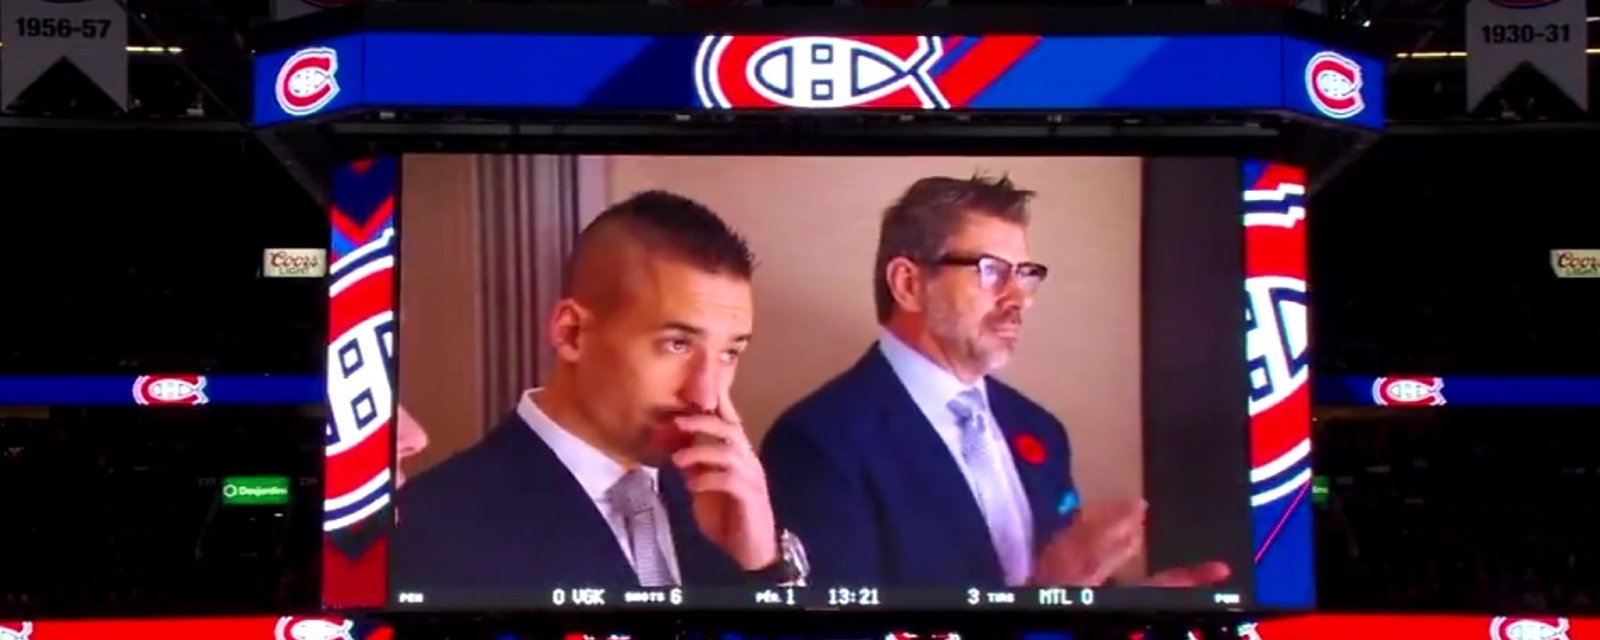 Plekanec can't hold back his emotions during final ovation from Montreal crowd.